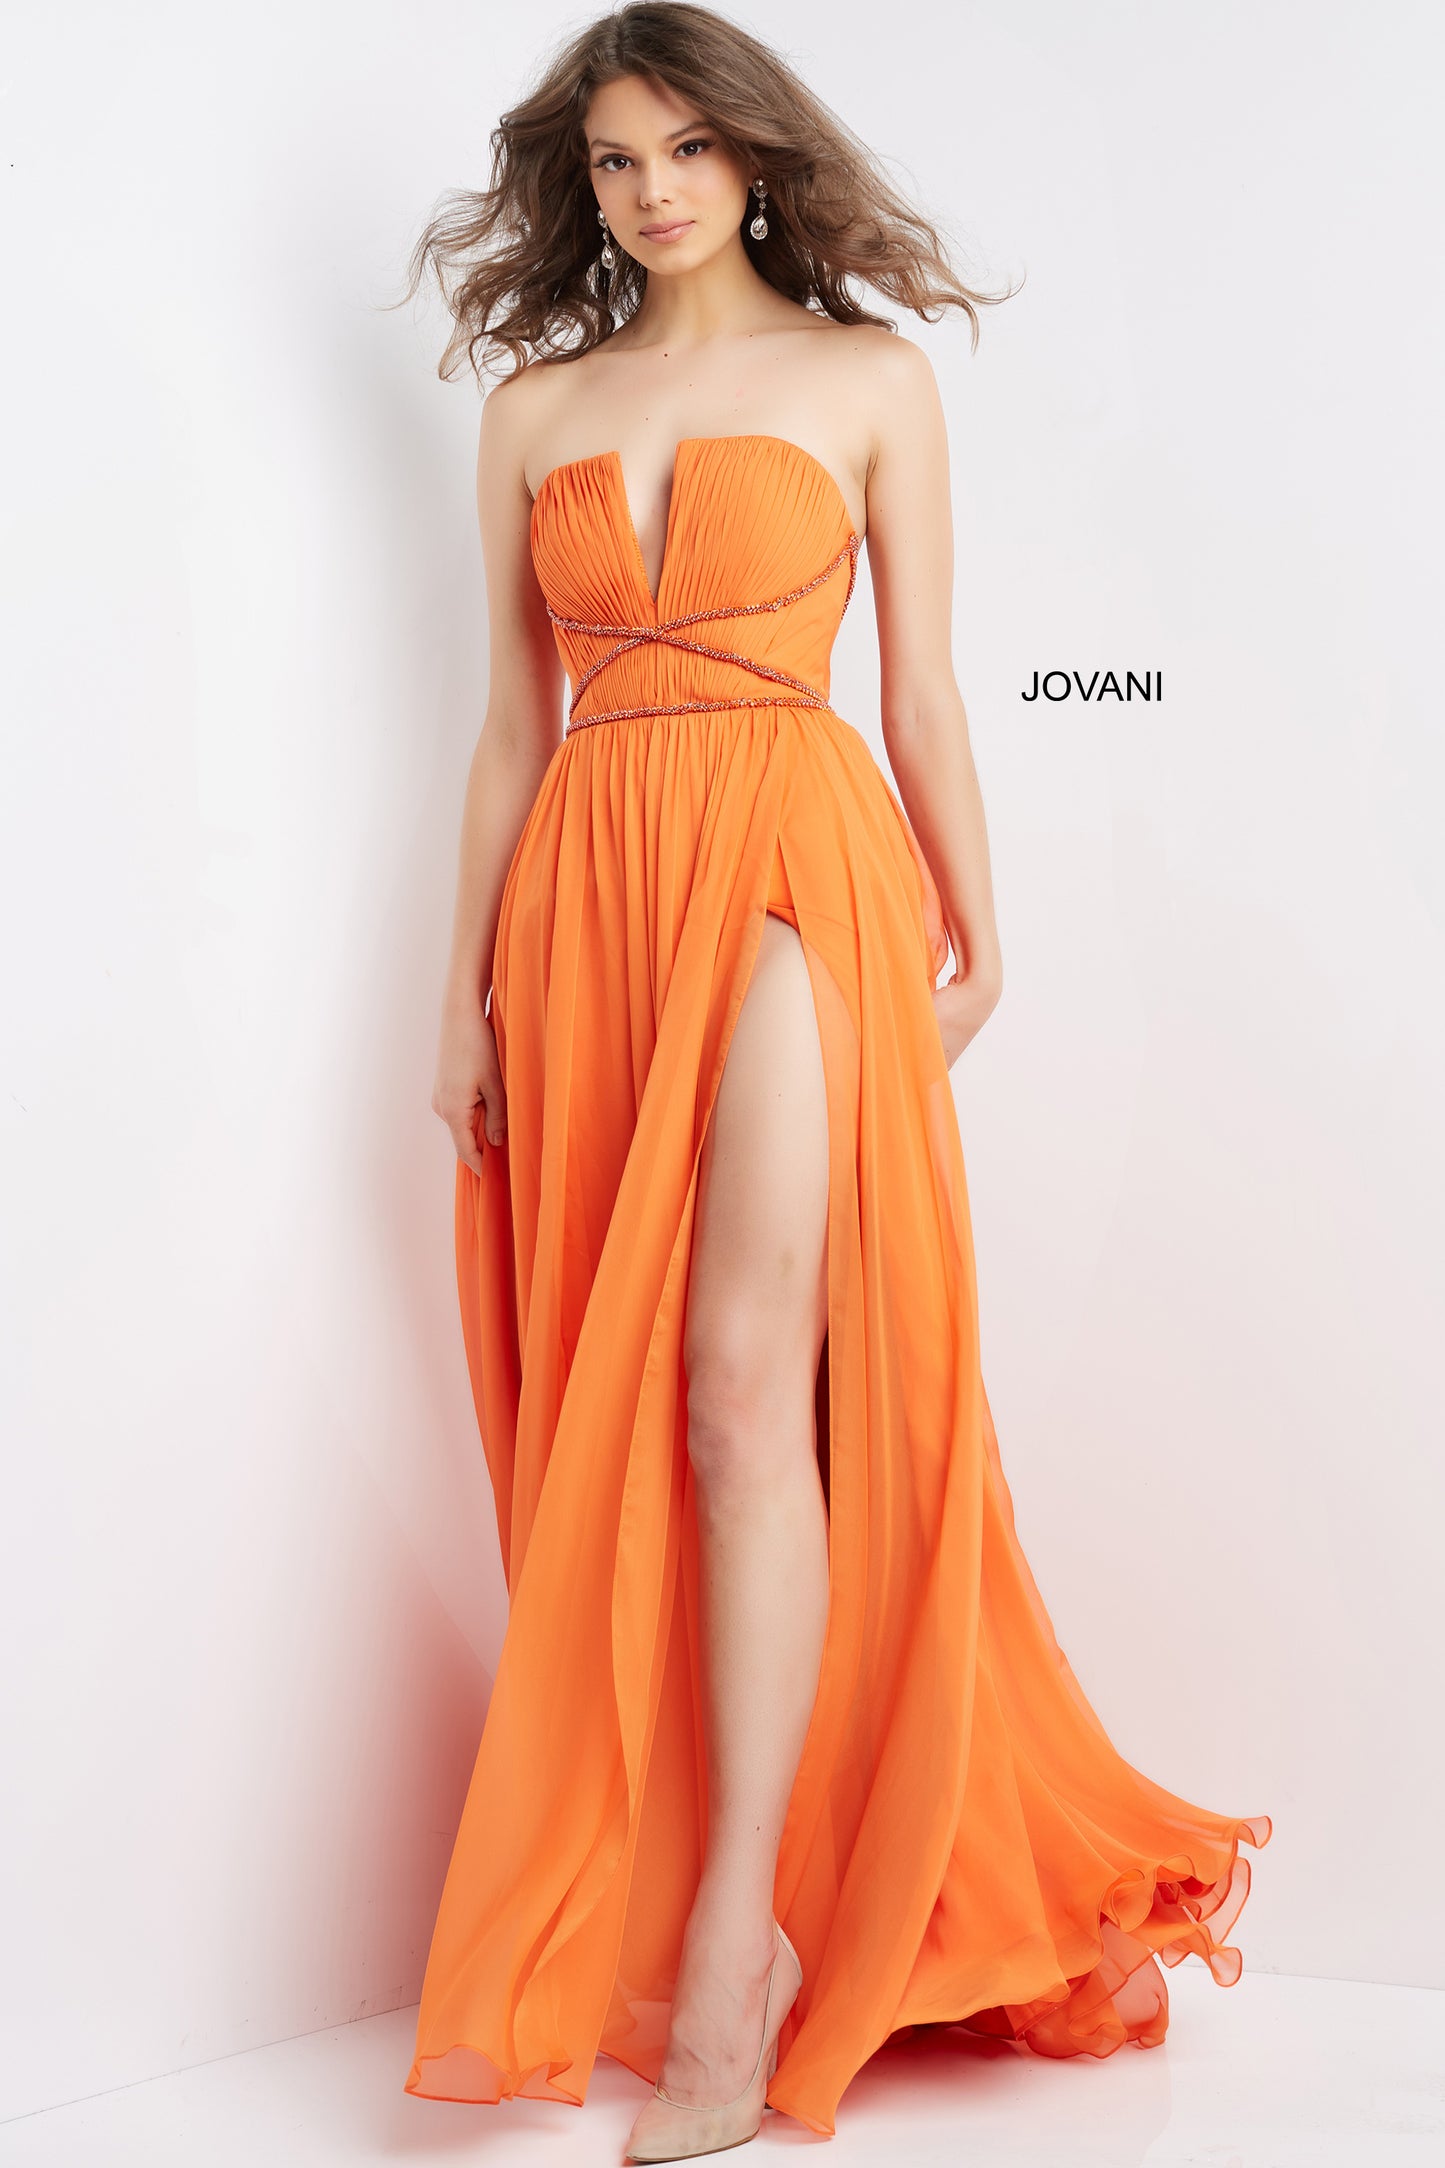 Jovani 05971 Long A Line Prom Dress Evening Gown